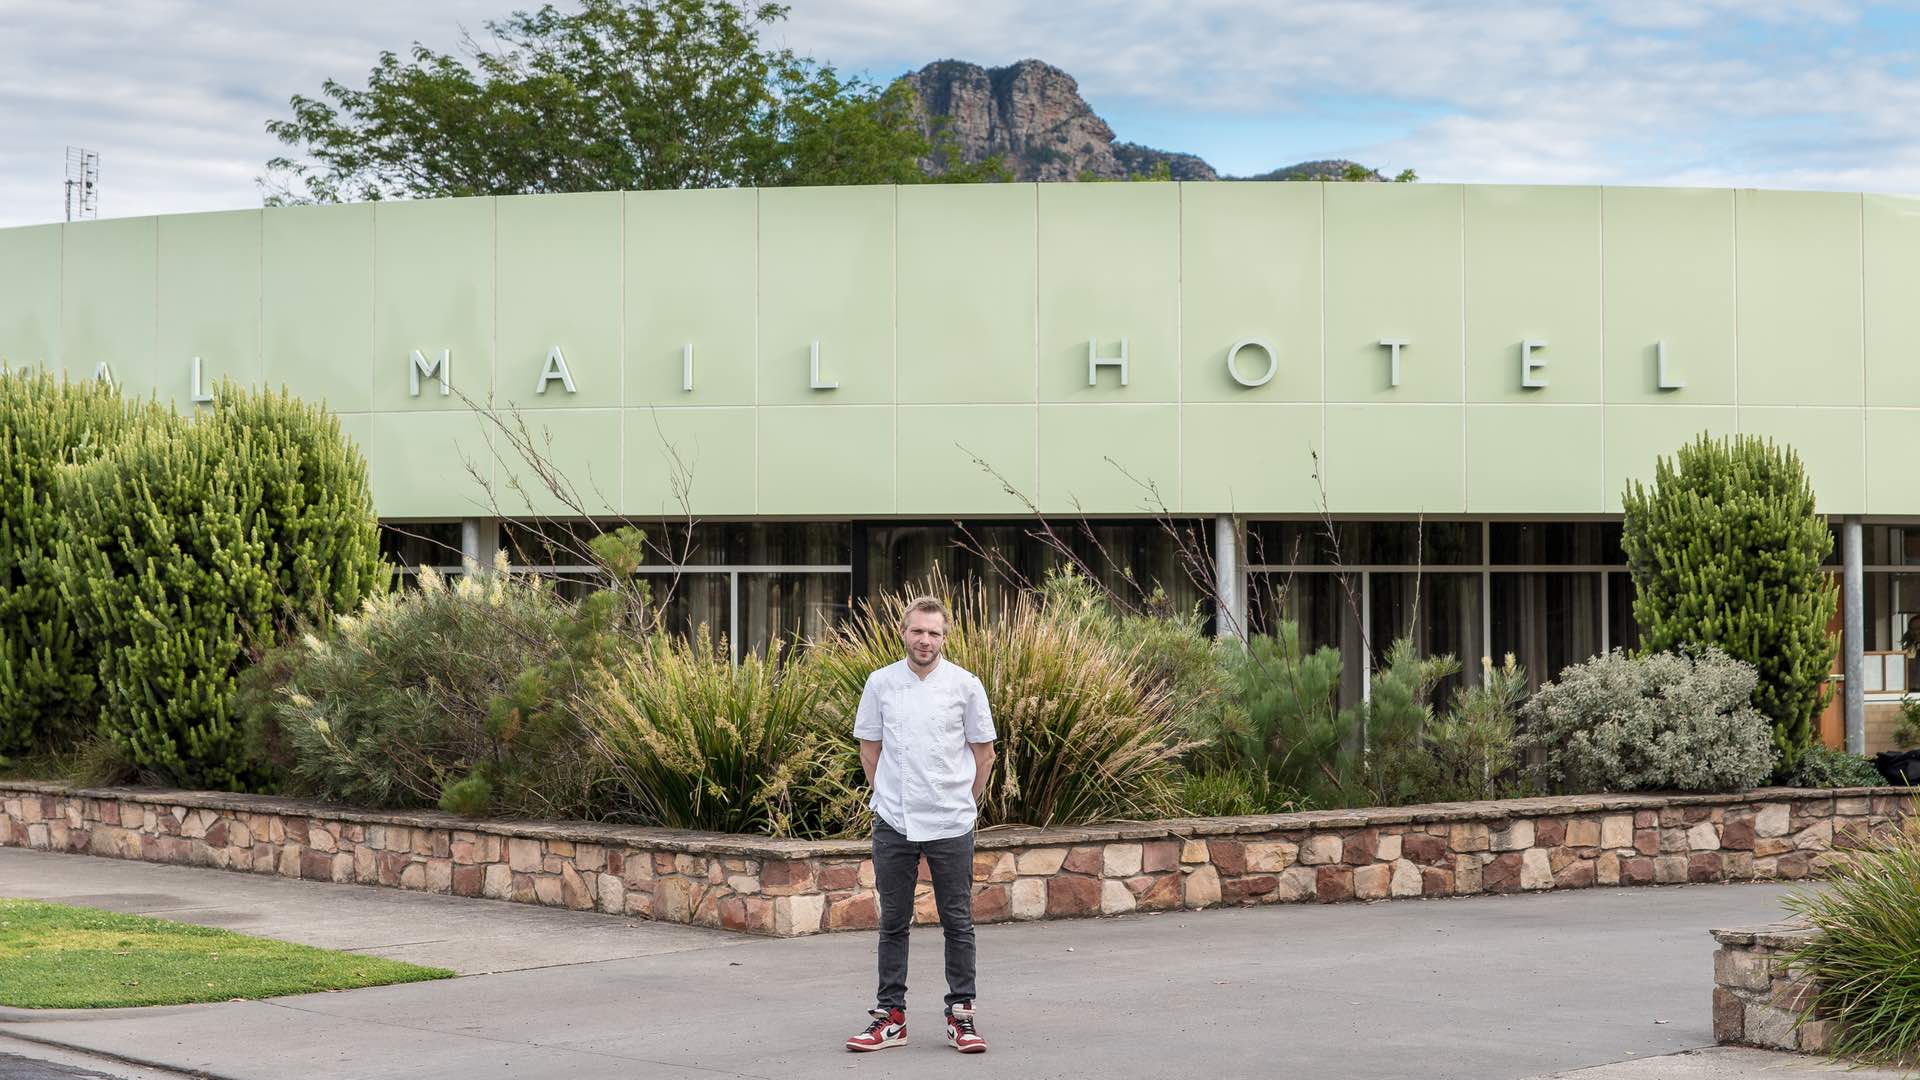 The Grampians' Royal Mail Hotel Is Getting a New Fine Dining Restaurant